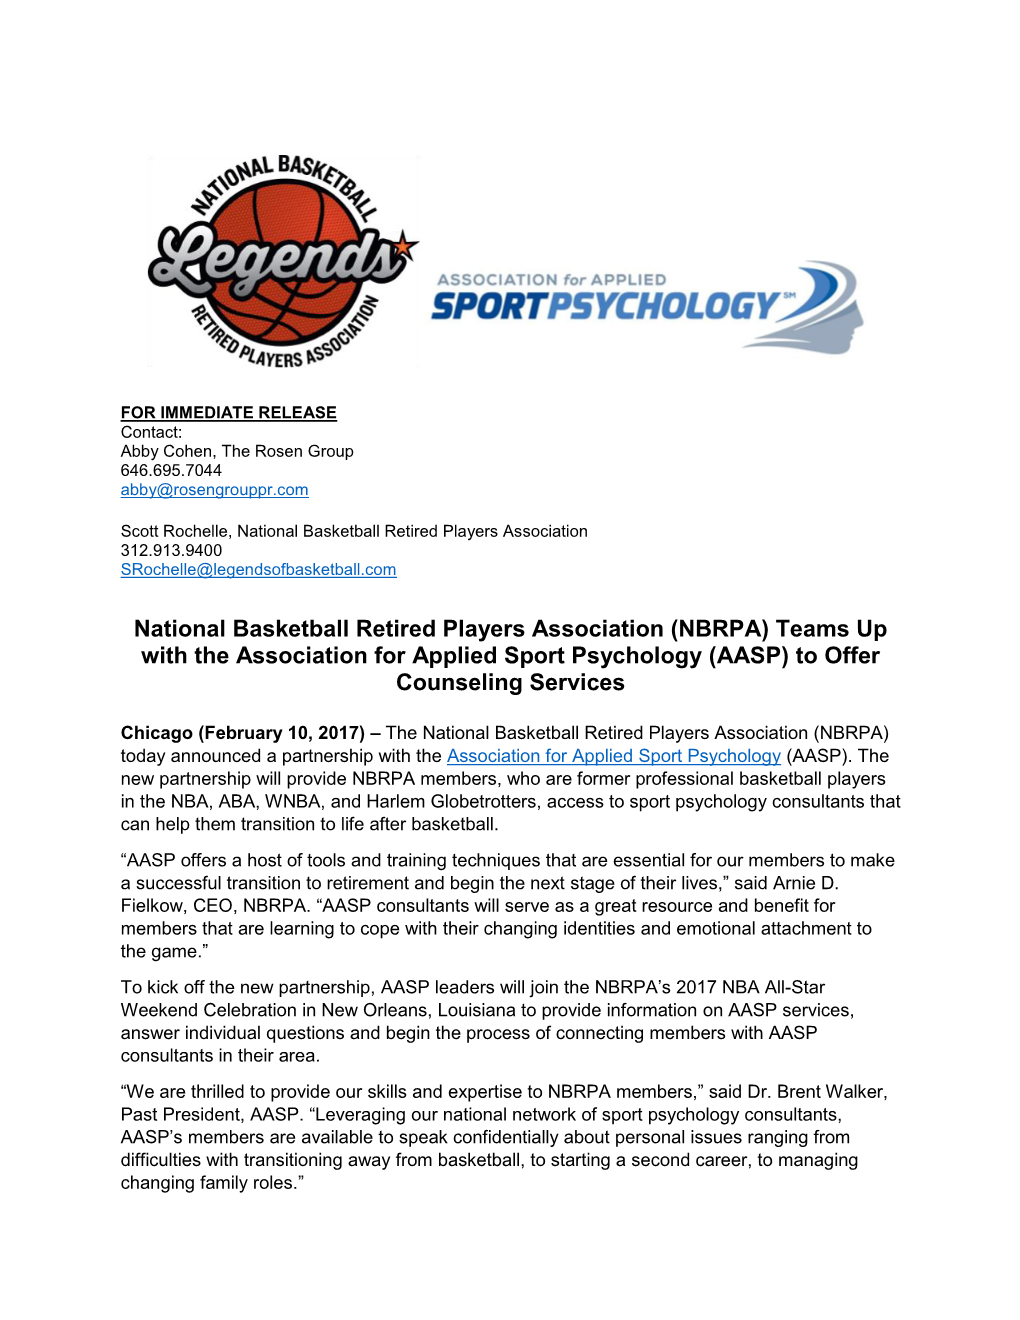 National Basketball Retired Players Association (NBRPA) Teams up with the Association for Applied Sport Psychology (AASP) to Offer Counseling Services